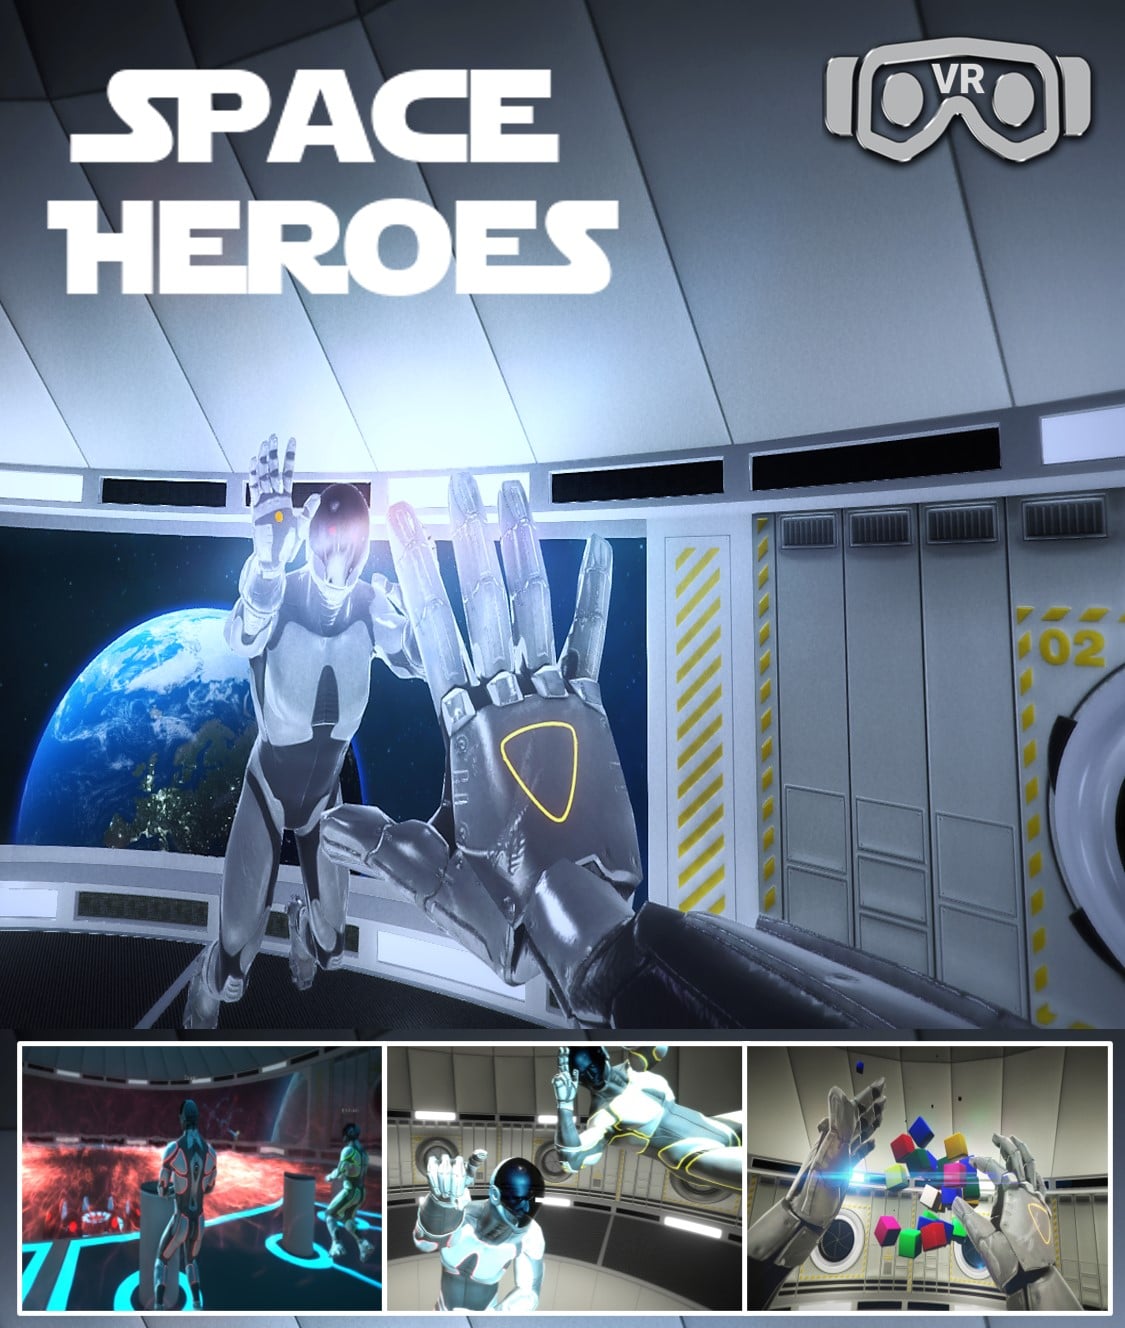 Space Heroes-Entermission Virtual Reality Escape Room-644x760-VR